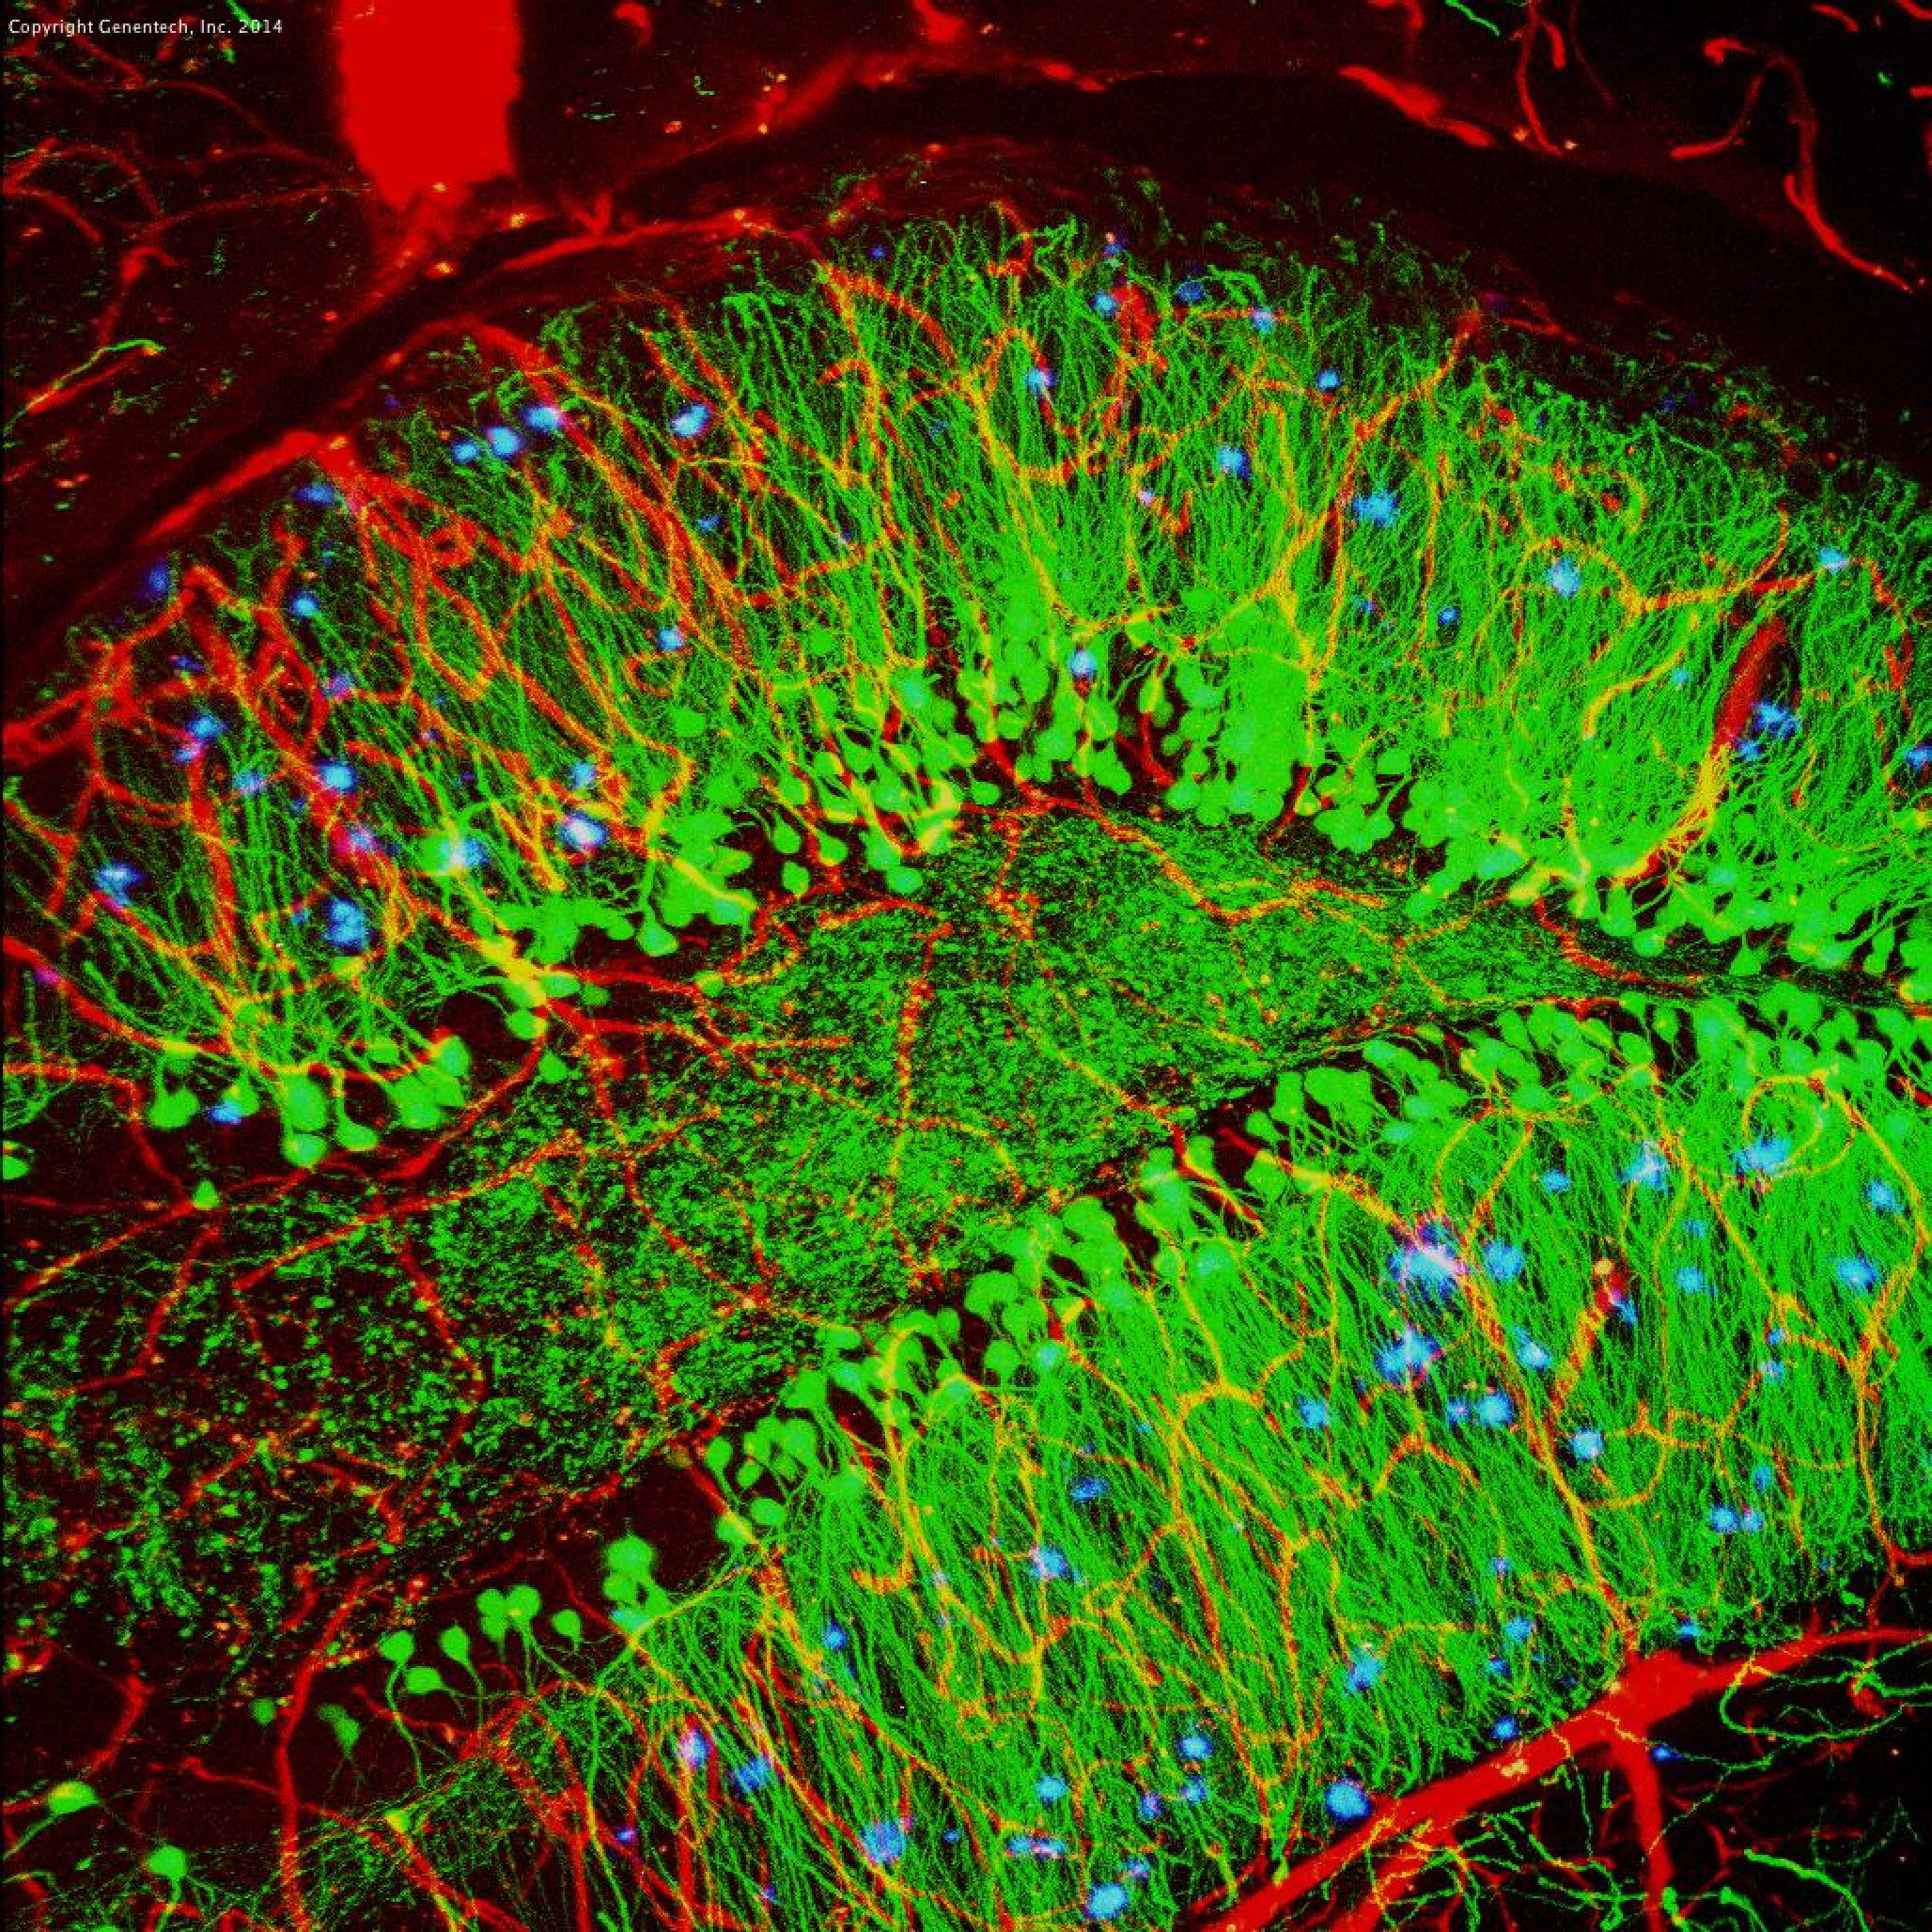 Mouse brain showing hallmarks of Alzheimer’s disease (amyloid plaques in blue) with blood vessels (red) and nerve cells (green). 